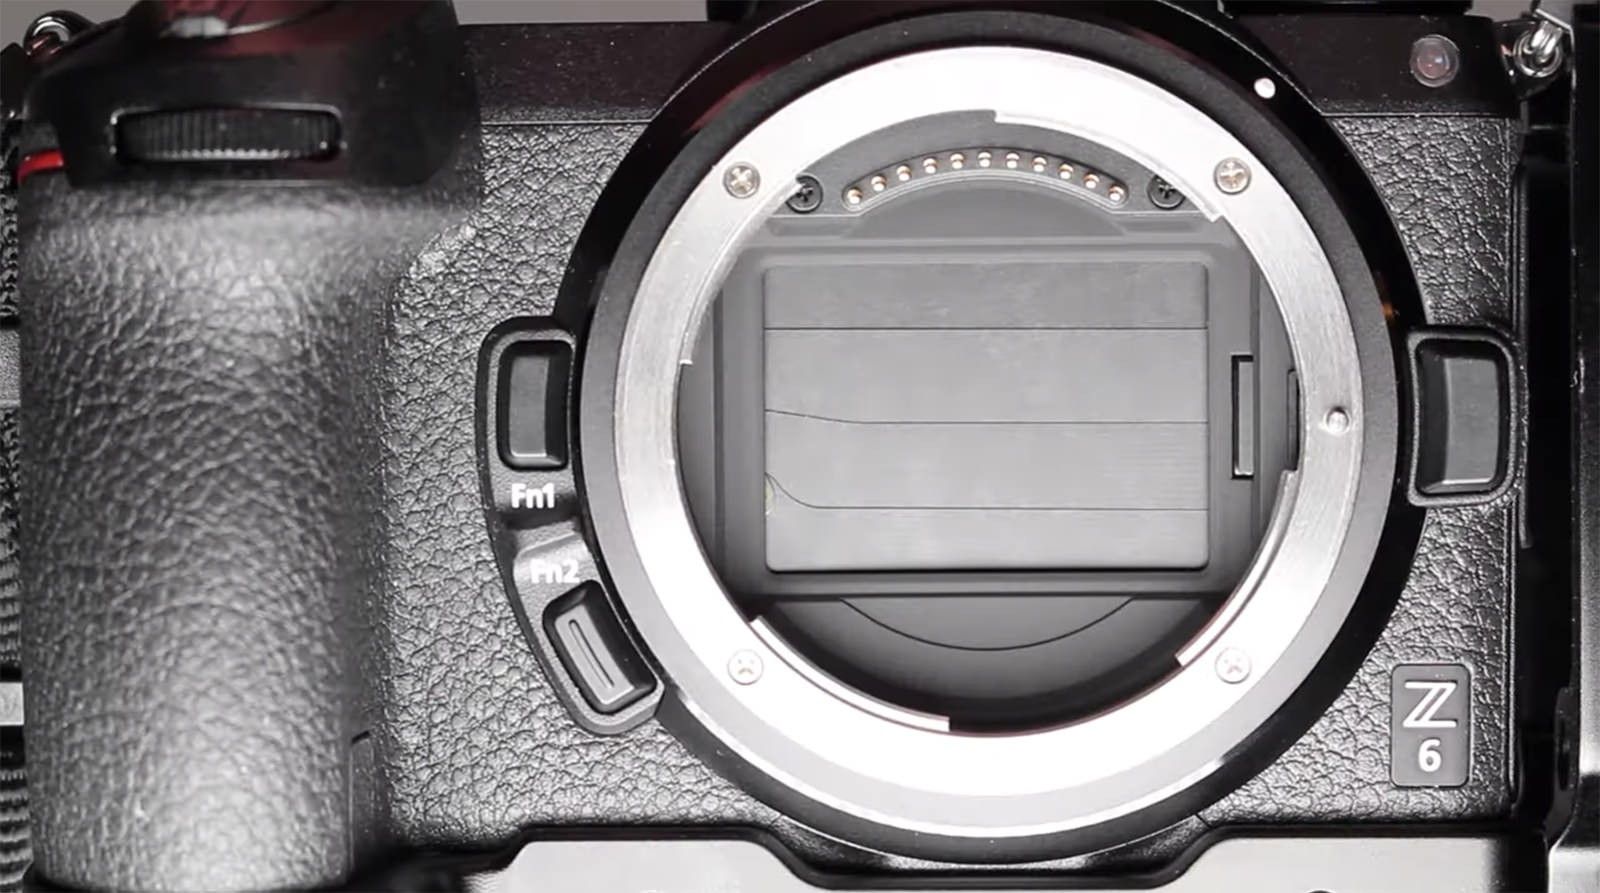 This Lens Hack Could Lock Up Your Nikon Camera